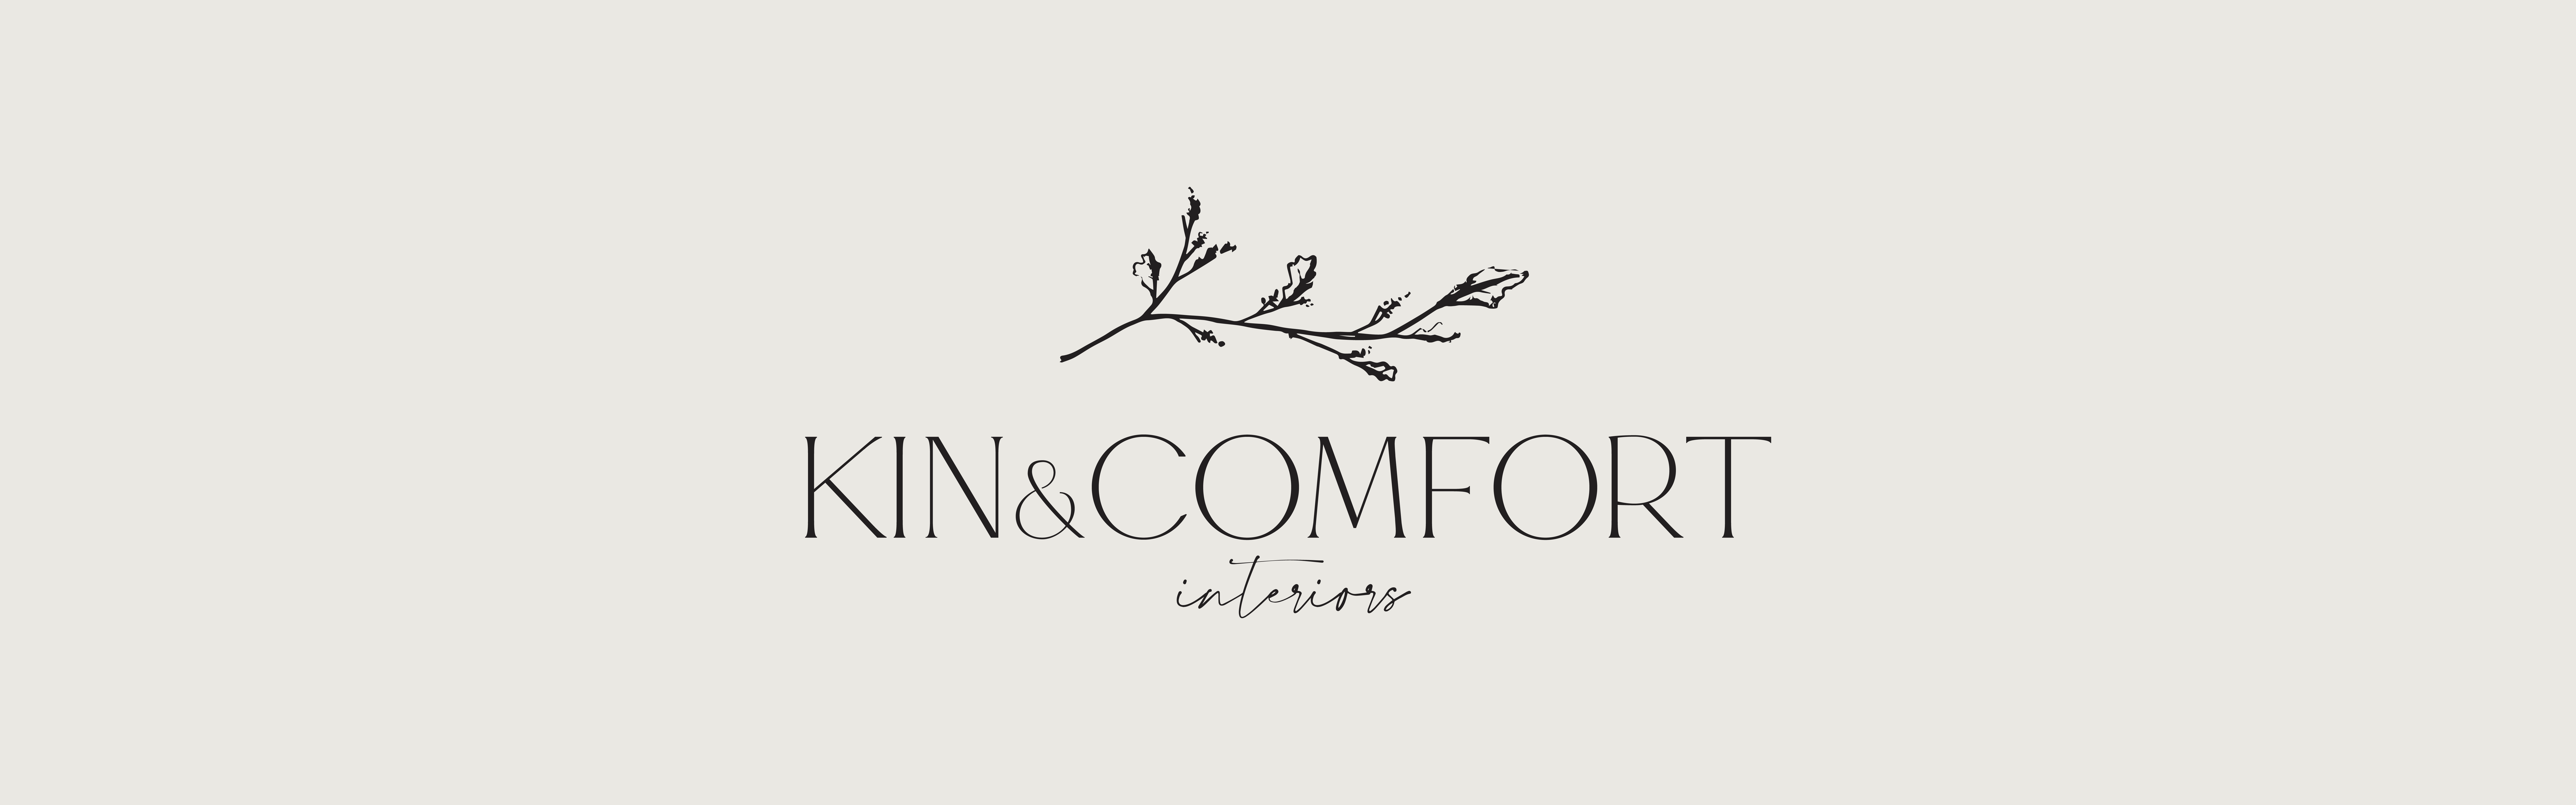 The image showcases a simple, elegant logo for Kin & Comfort Interiors in a stylish, minimalist font, complemented by a hand-drawn illustration of a plant branch above.